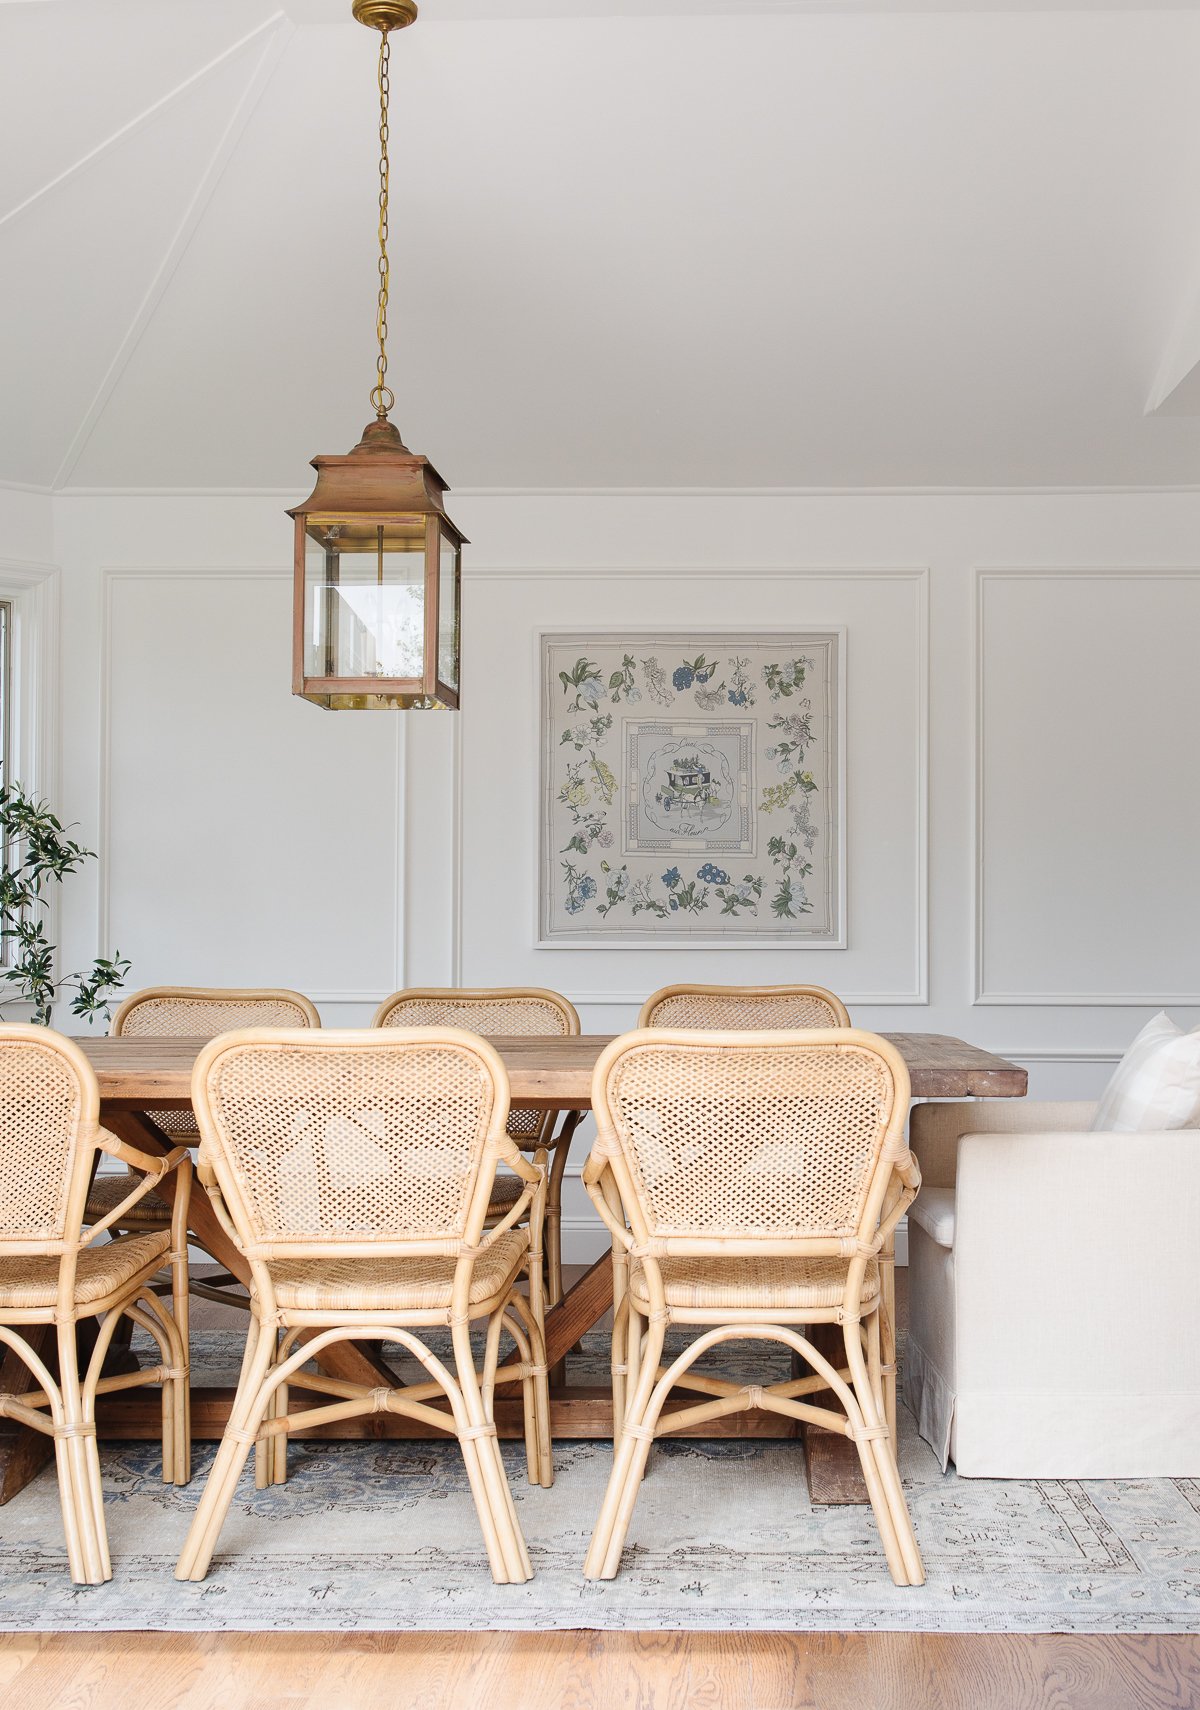 A white breakfast nook featuring a wooden table and rattan chairs with a brass lantern hanging above.